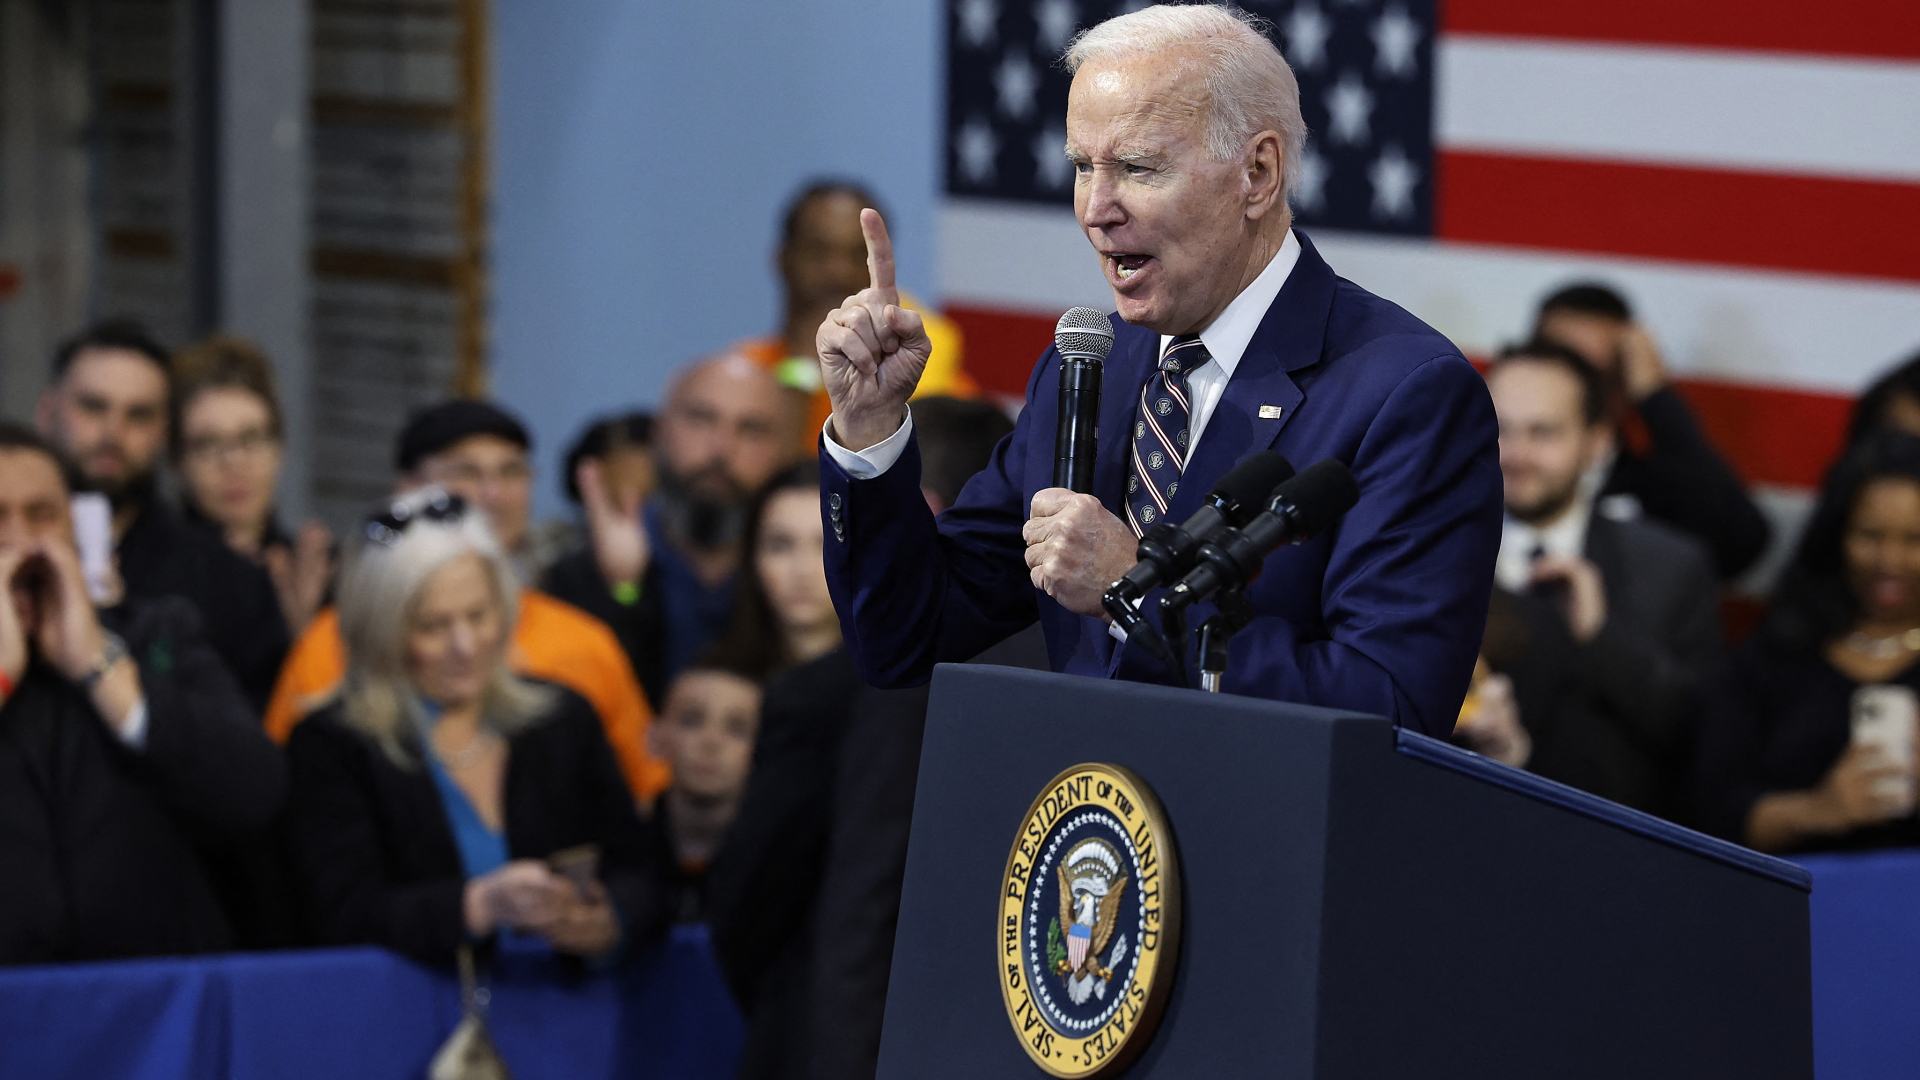 US government budget proposal: Biden wants to raise taxes for the wealthy